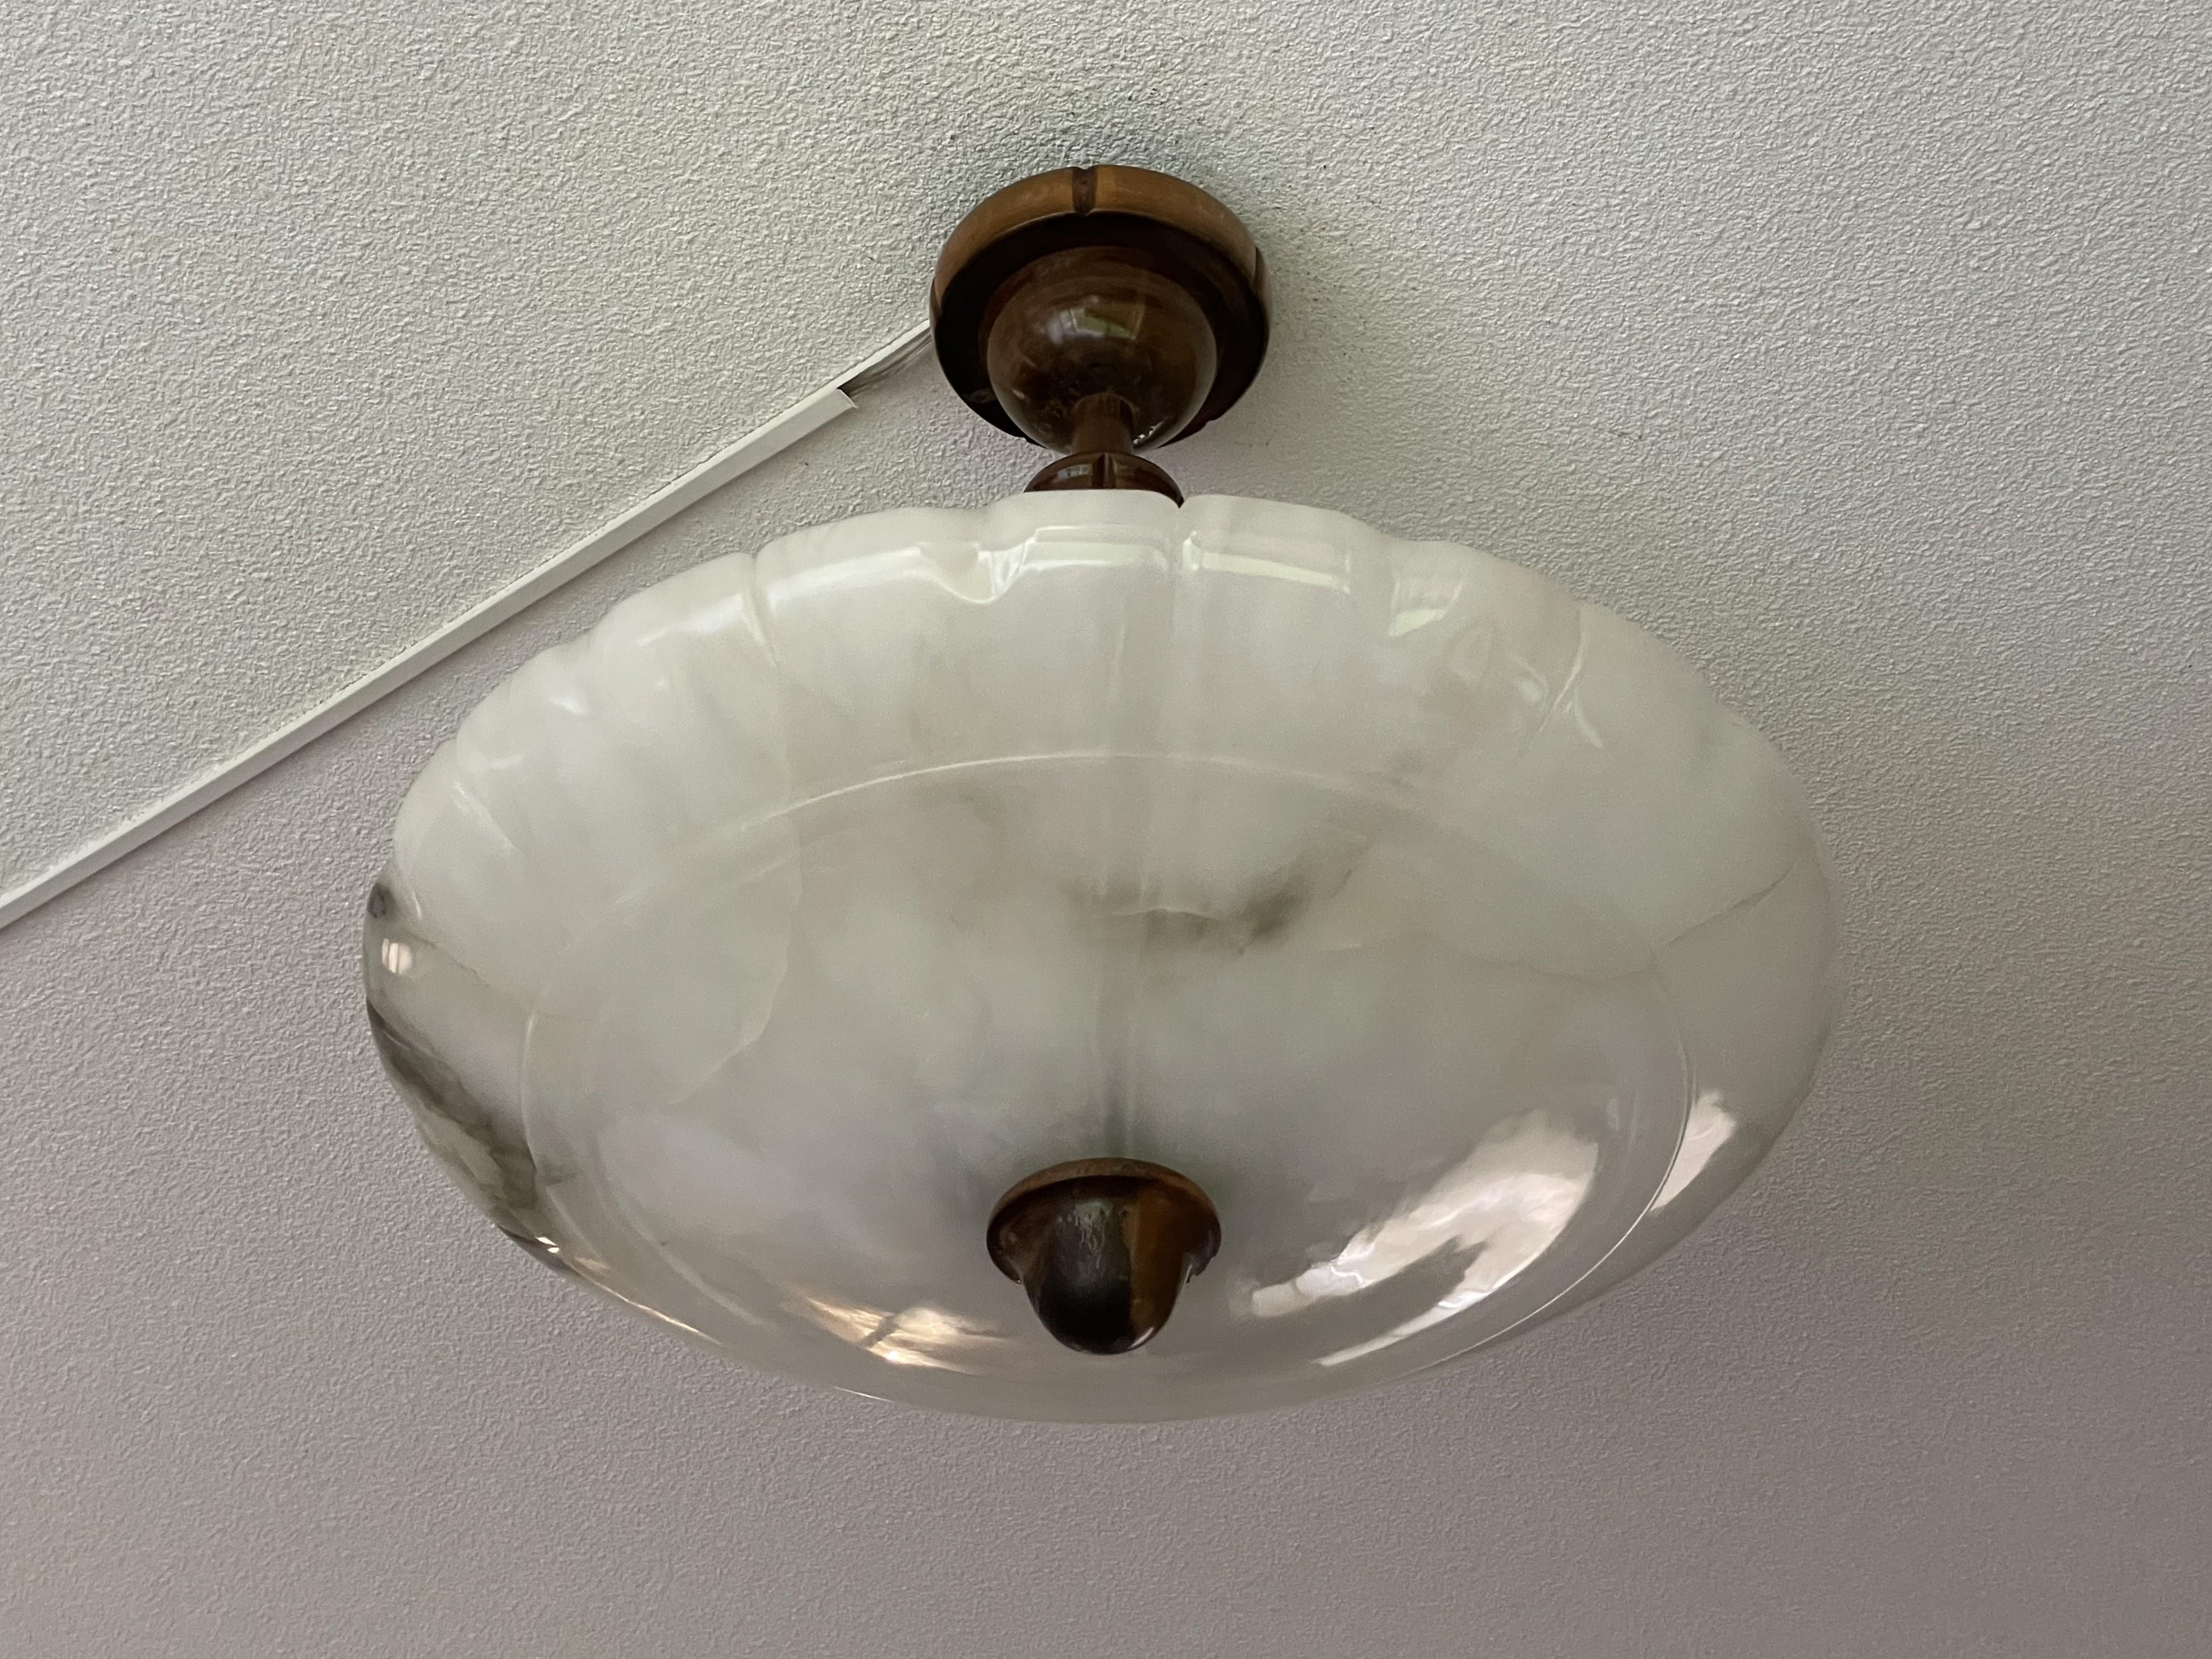 Timeless mineral stone flush mount from the European Art Deco era.

This wonderfully stylish and good size Art Deco light fixture comes with a stunning and superbly polished alabaster shade. What makes this antique shade extra spectacular is the